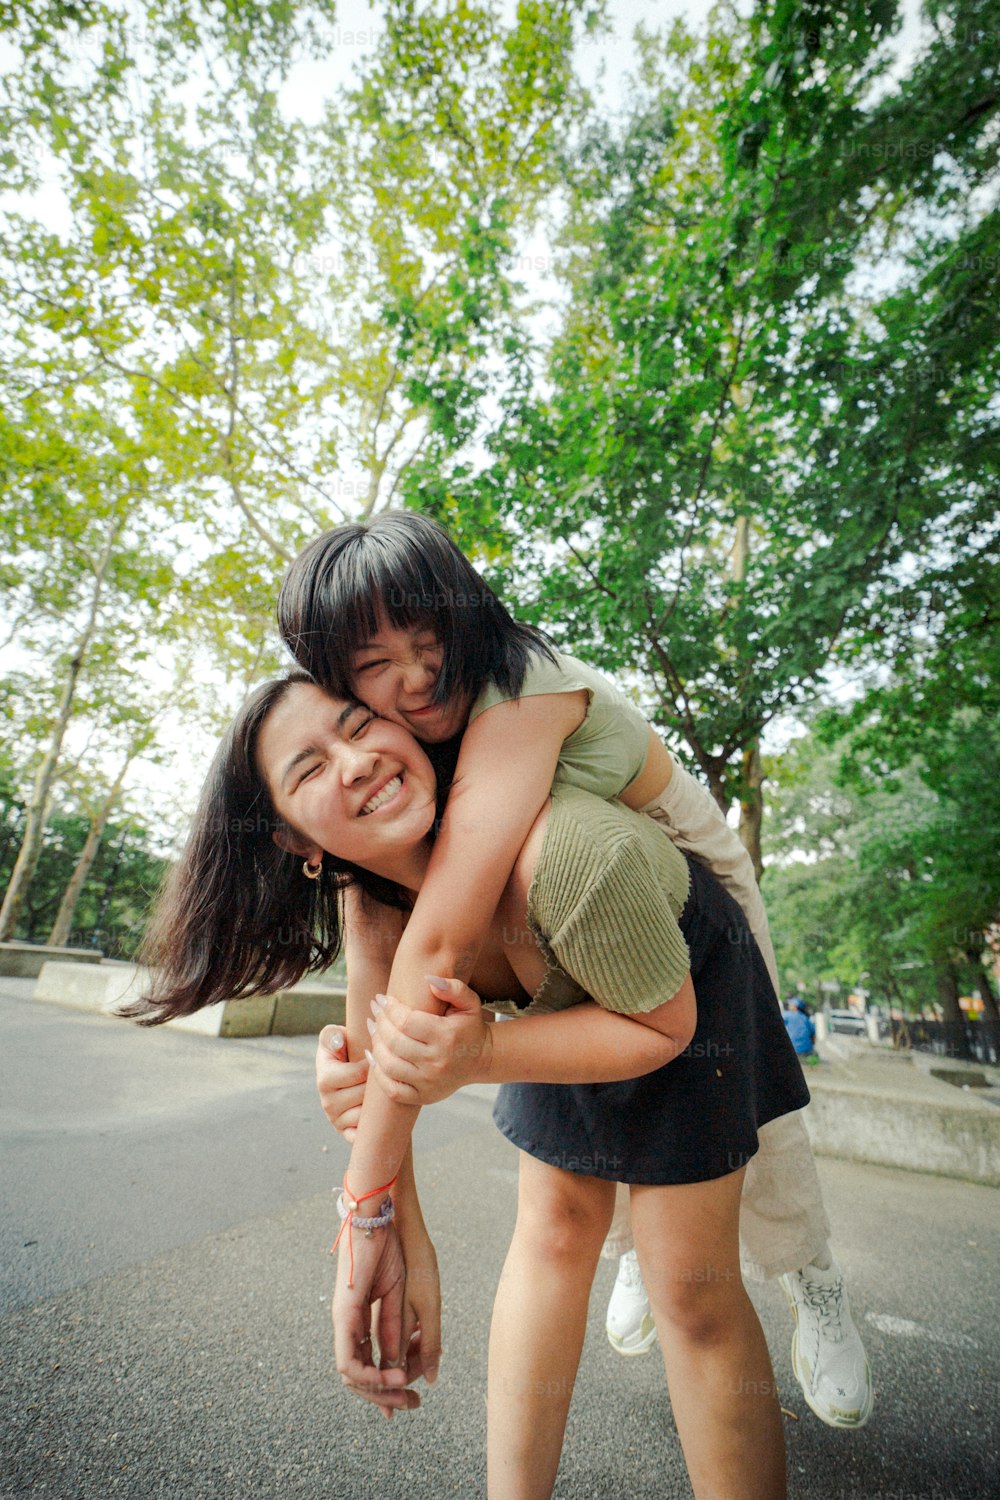 a woman is hugging a young girl on a skateboard